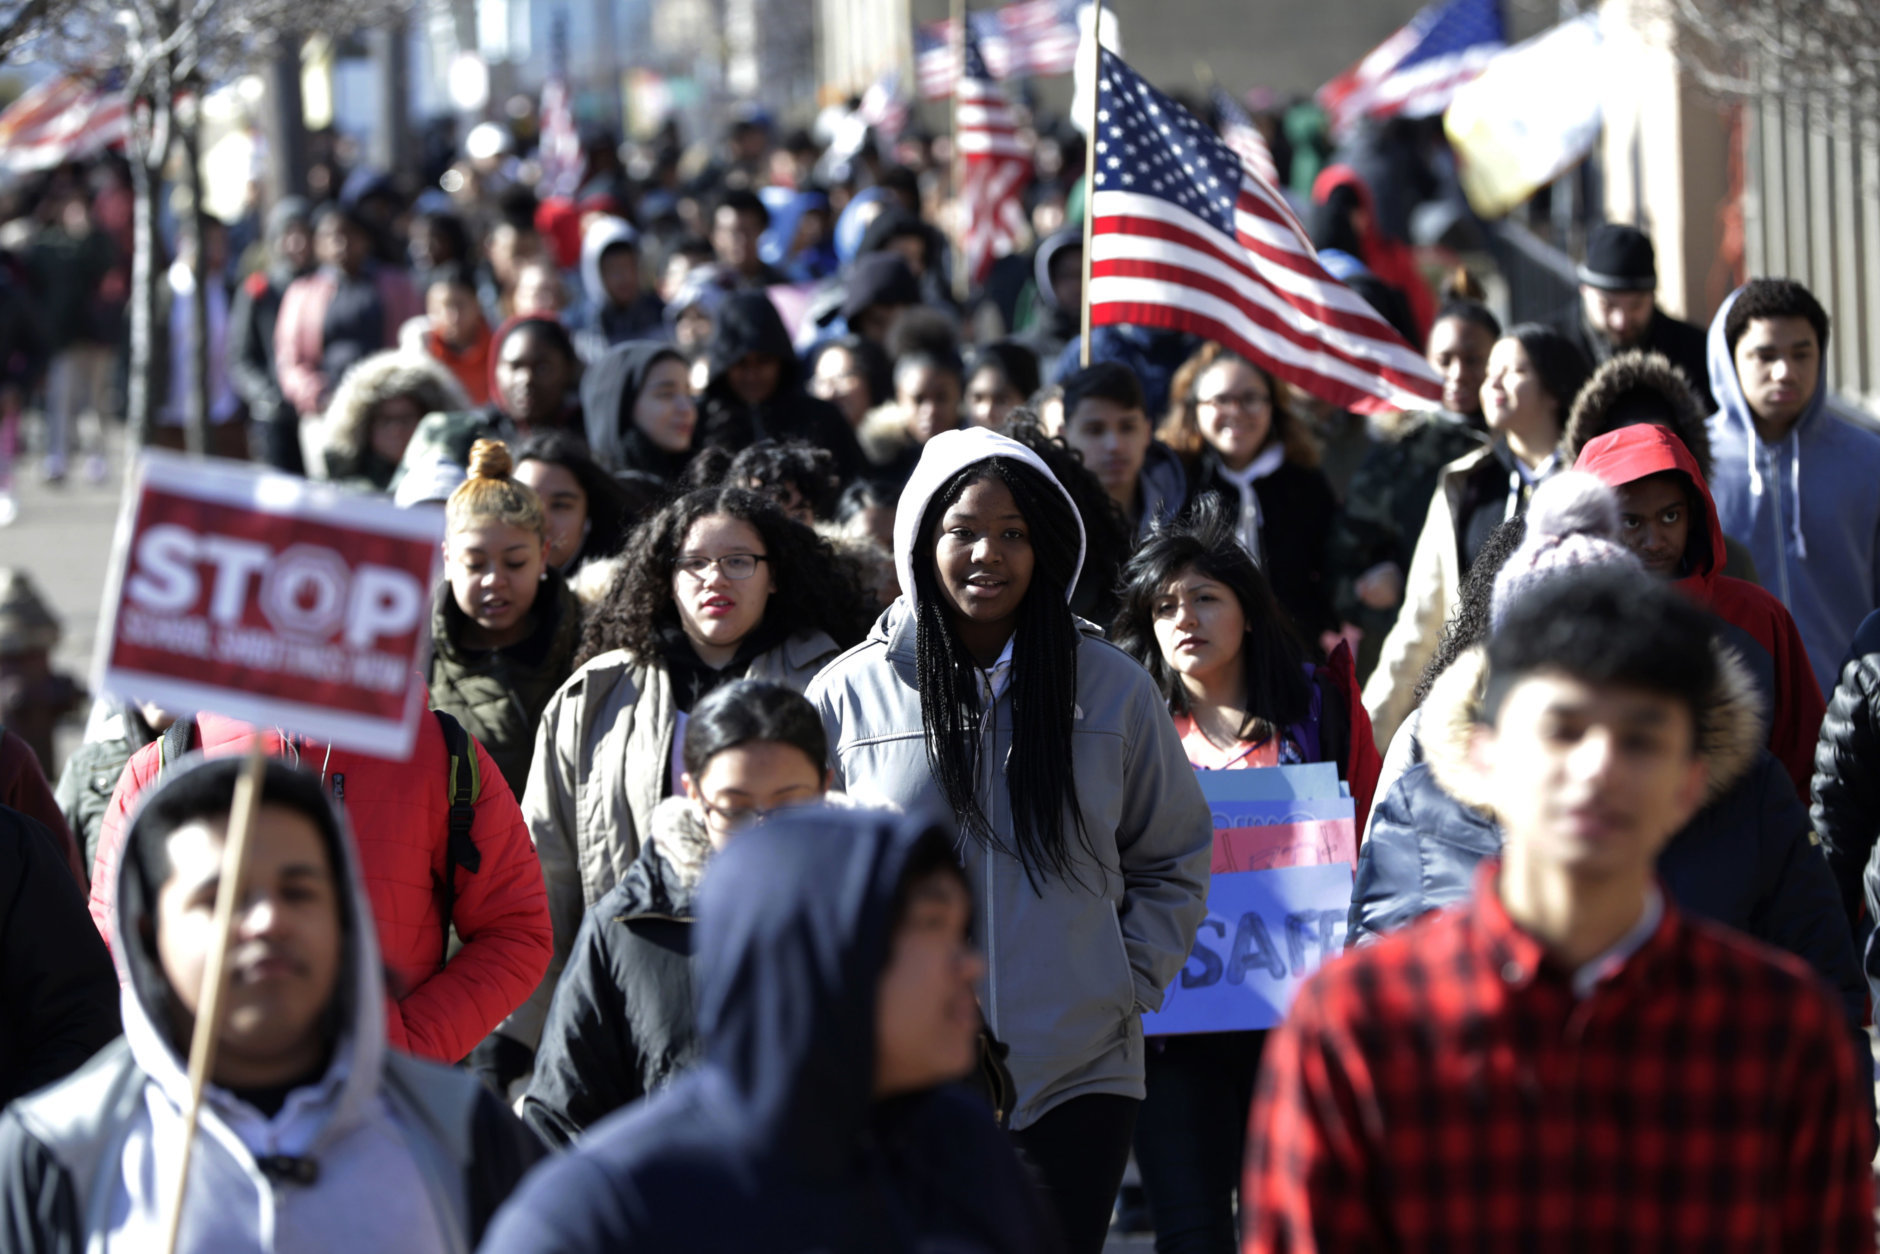 Diamond Bryant, center, a freshman at James Ferris High School walks with classmates during a student walkout, Wednesday, March 14, 2018, in Jersey City, N.J. Students across the country planned to participate in walkouts Wednesday to protest gun violence, one month after the deadly shooting inside a high school in Parkland, Fla. (AP Photo/Julio Cortez)